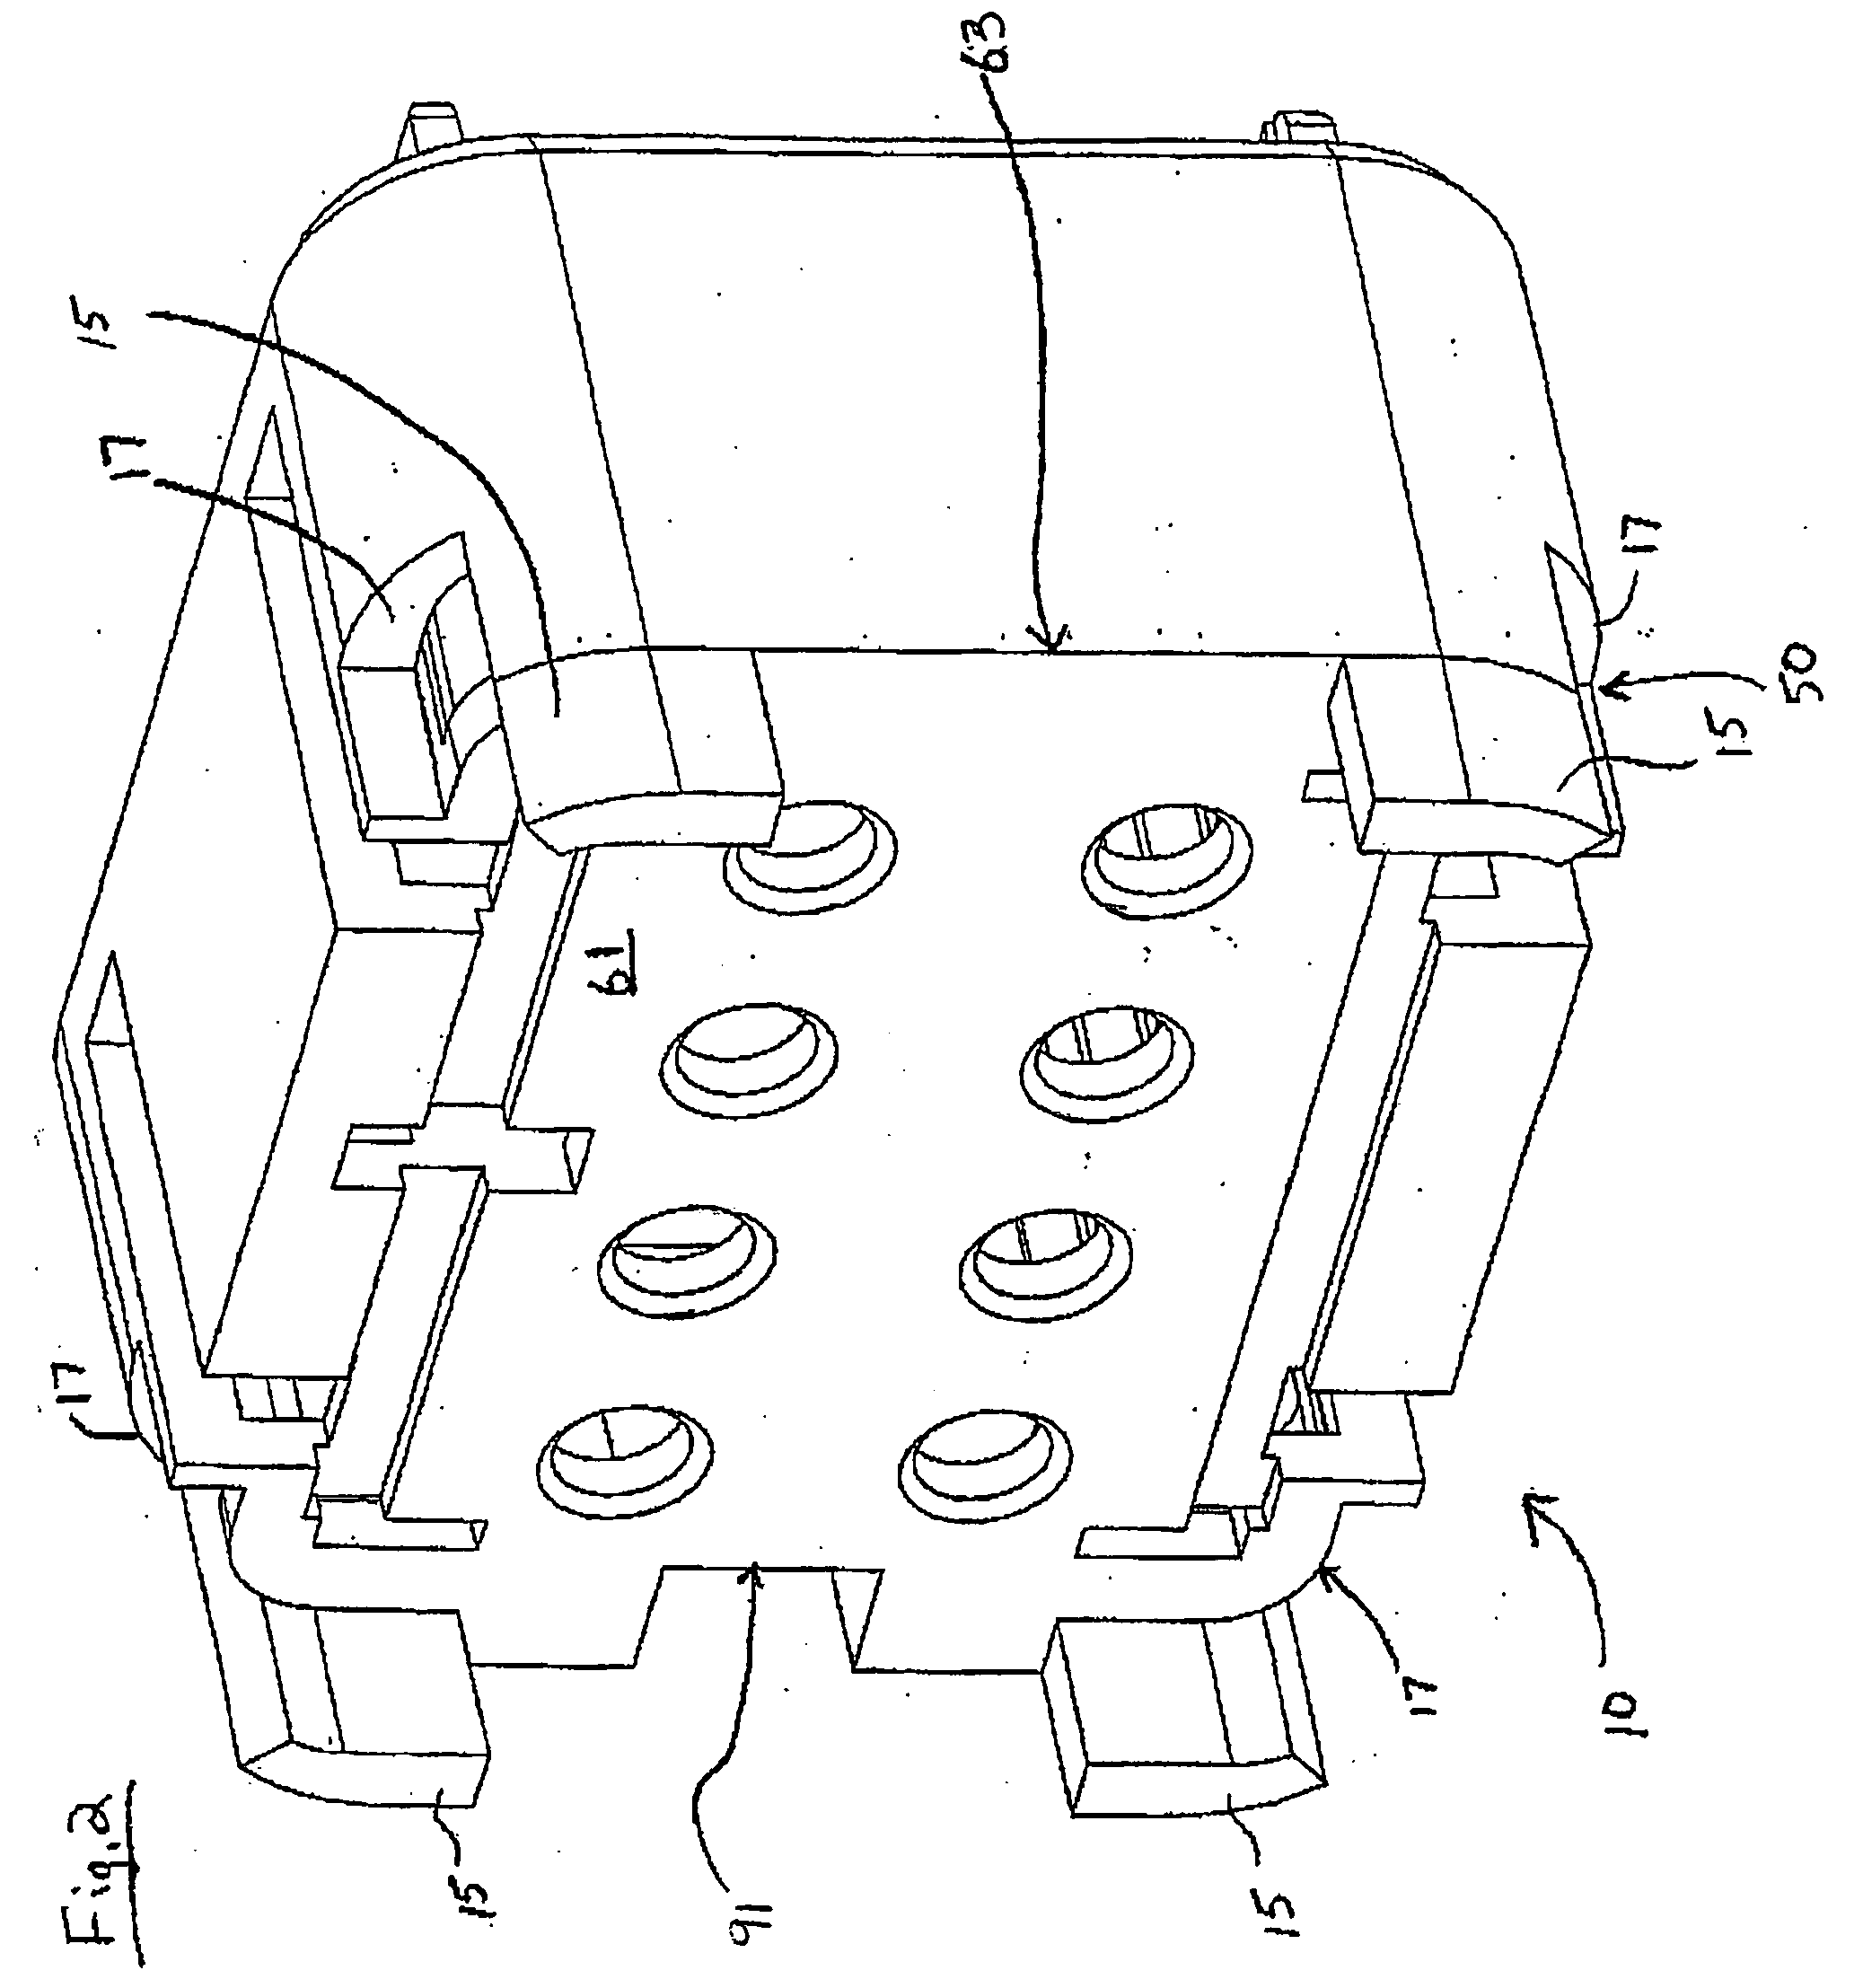 Terminal position assurance with forward interlocking face keying